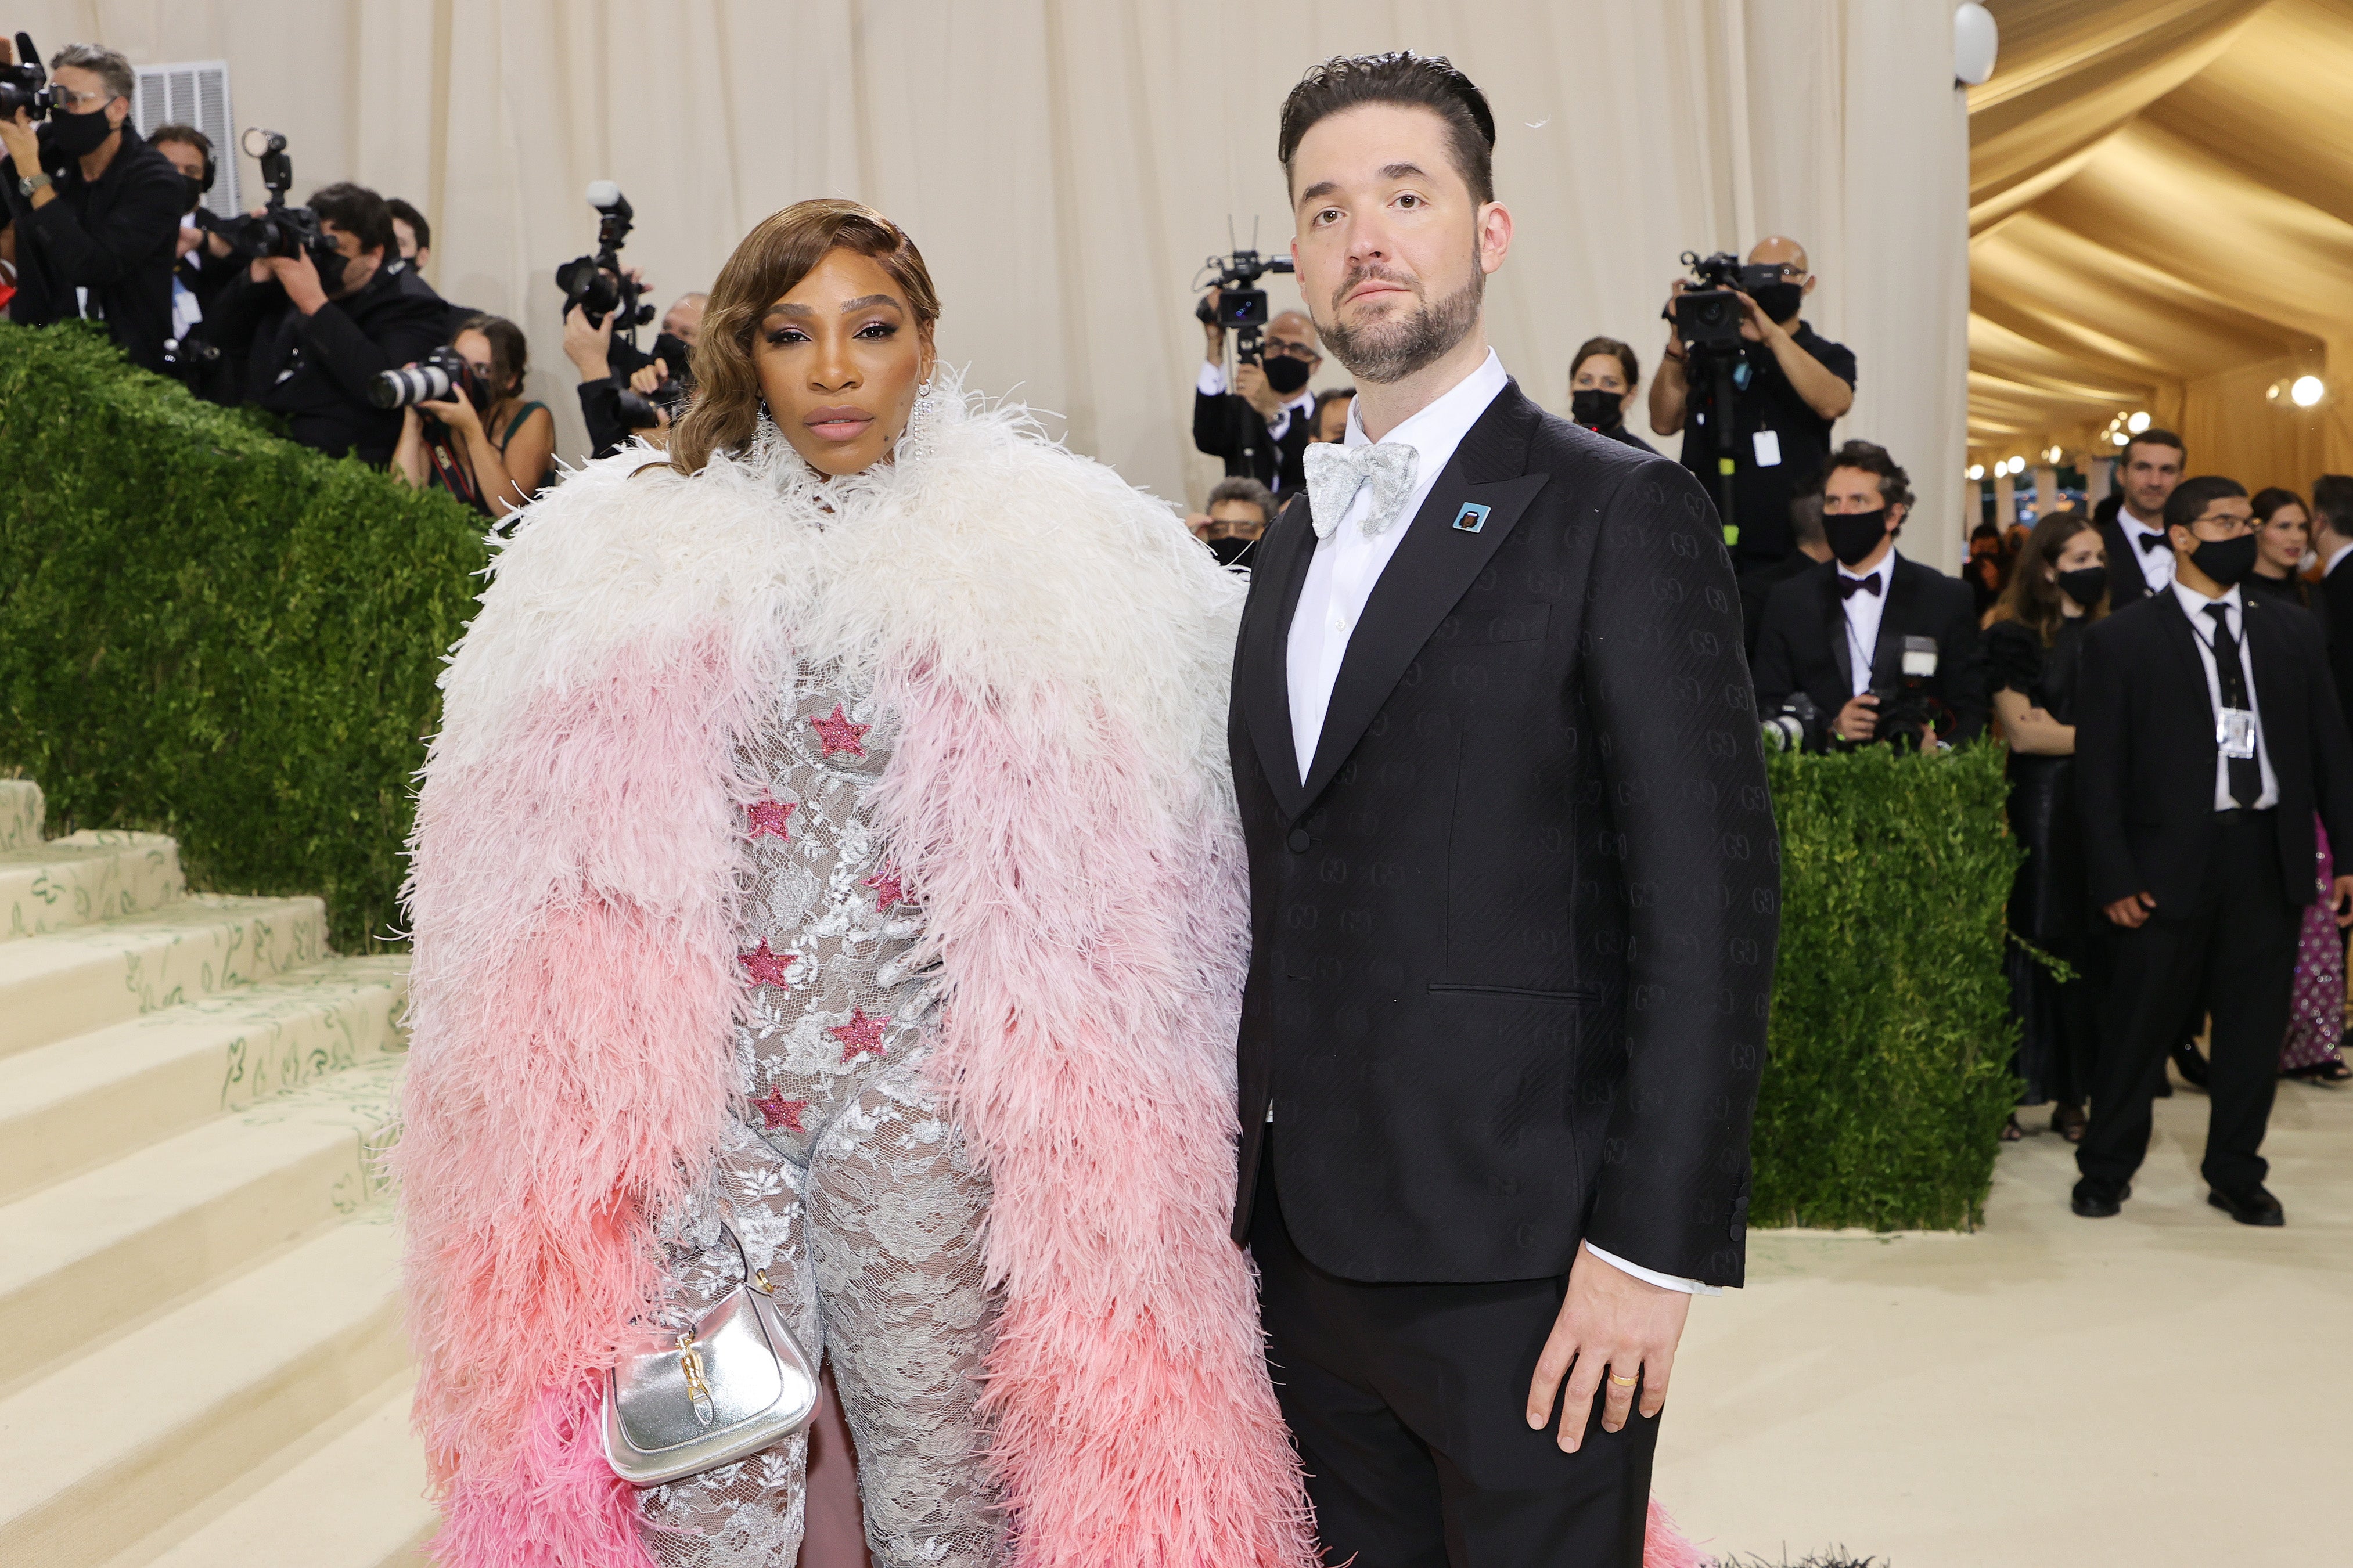 Alexis Ohanian Shows Off 280 000 Nft He Purchased For Serena Williams At 2021 Met Gala The